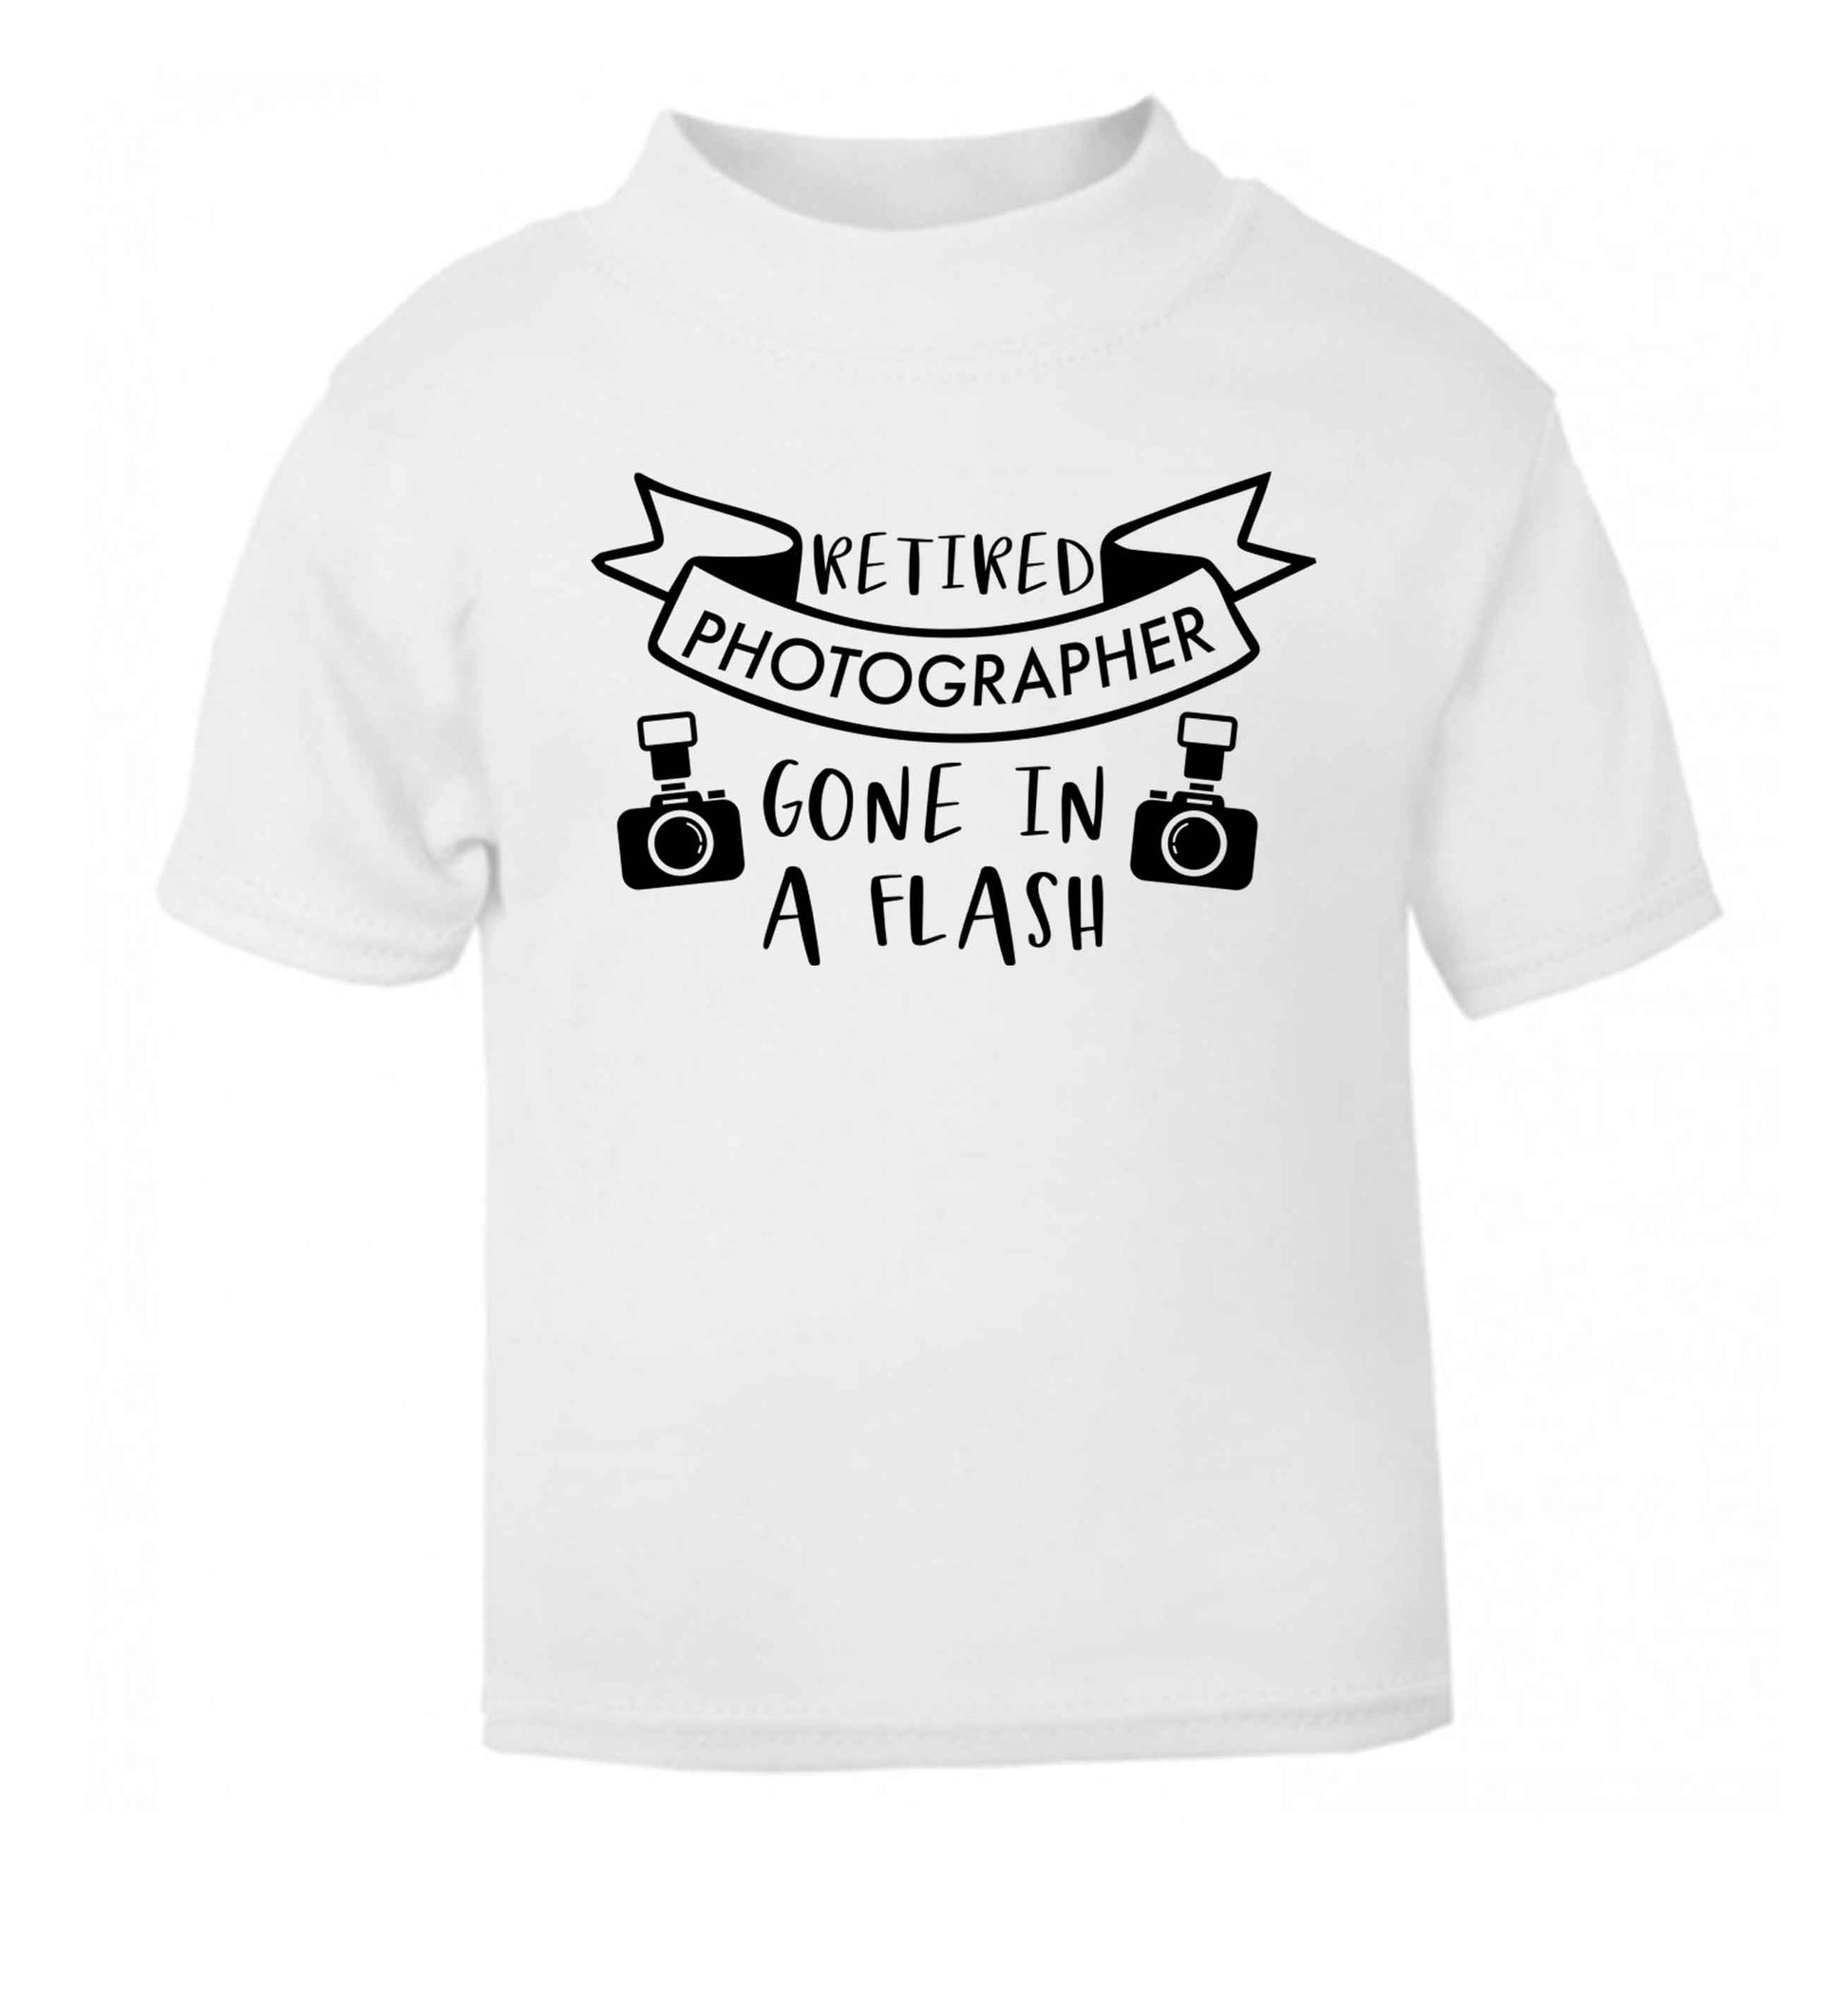 Retired photographer gone in a flash white Baby Toddler Tshirt 2 Years